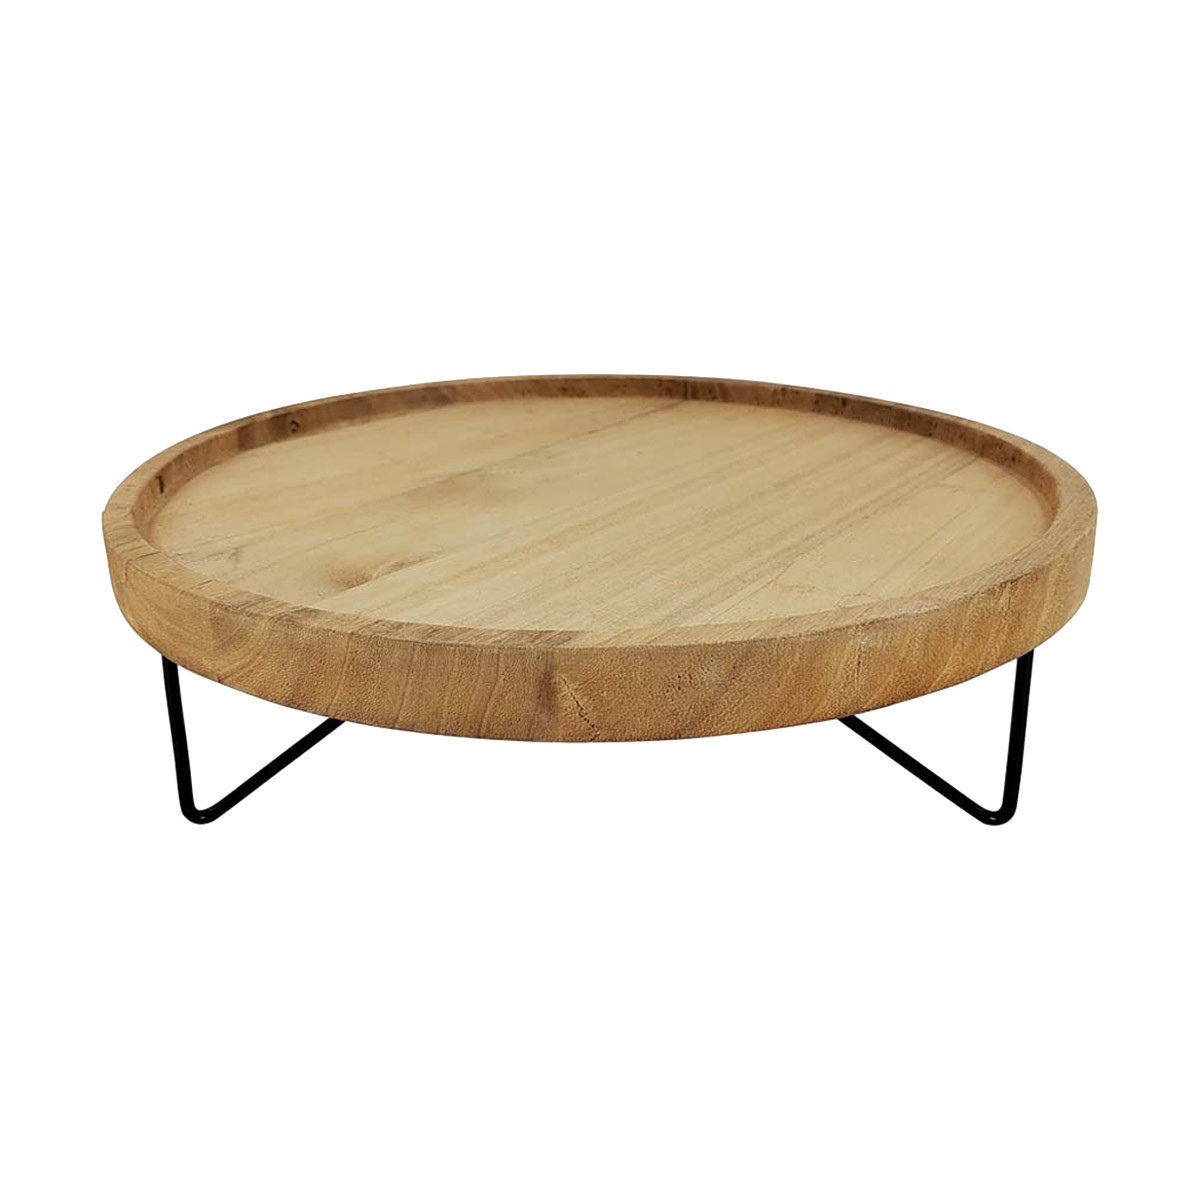 Wooden Round Decorative Tray with Metal Legs, Brown